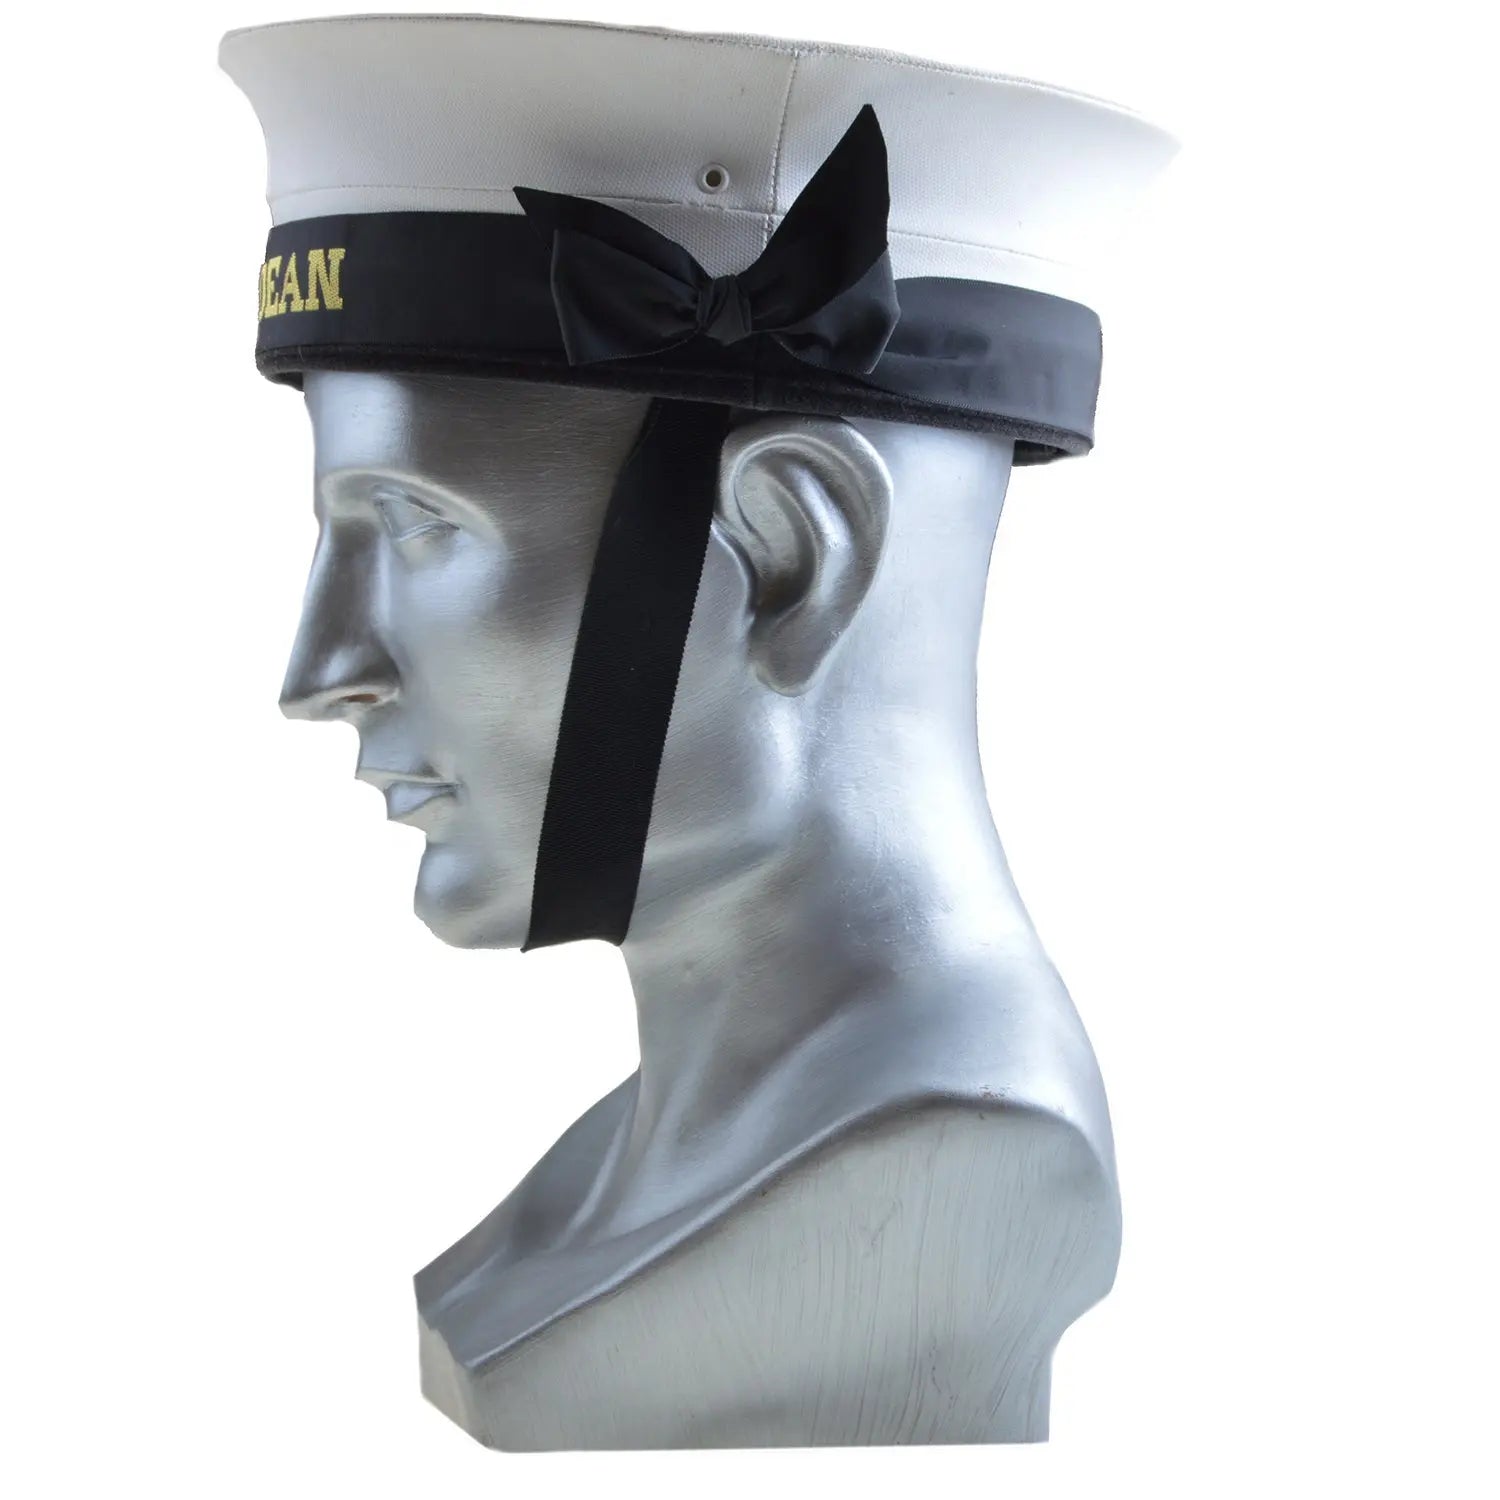 Maritime Commissioning and Testing Authority (MCTA) Royal Navy Cap Tally wyedean